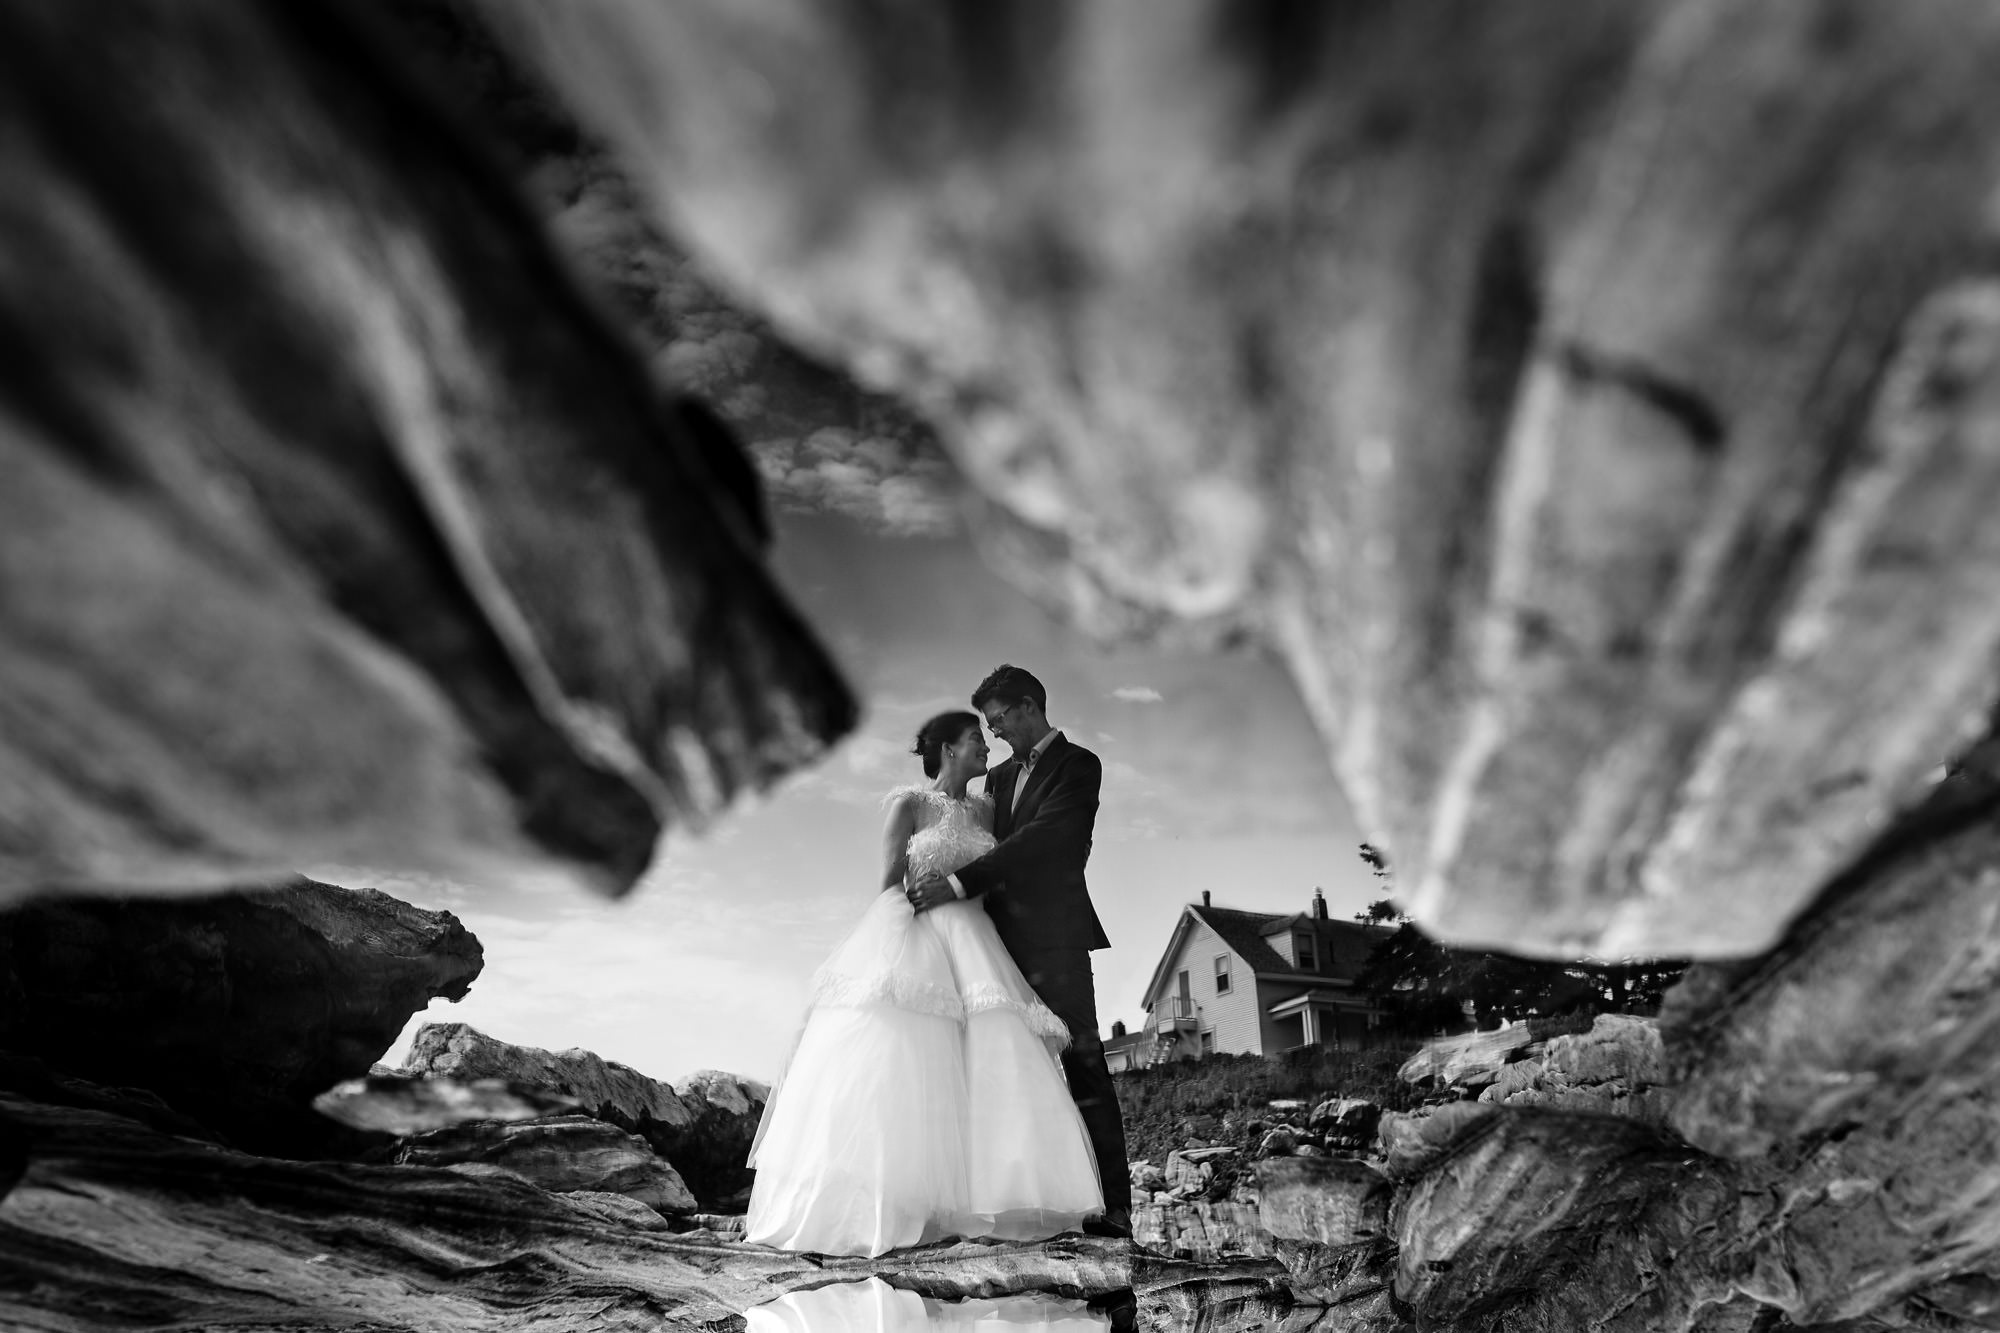 A bride and groom take wedding portraits at Pemaquid Point Lighthouse in Maine